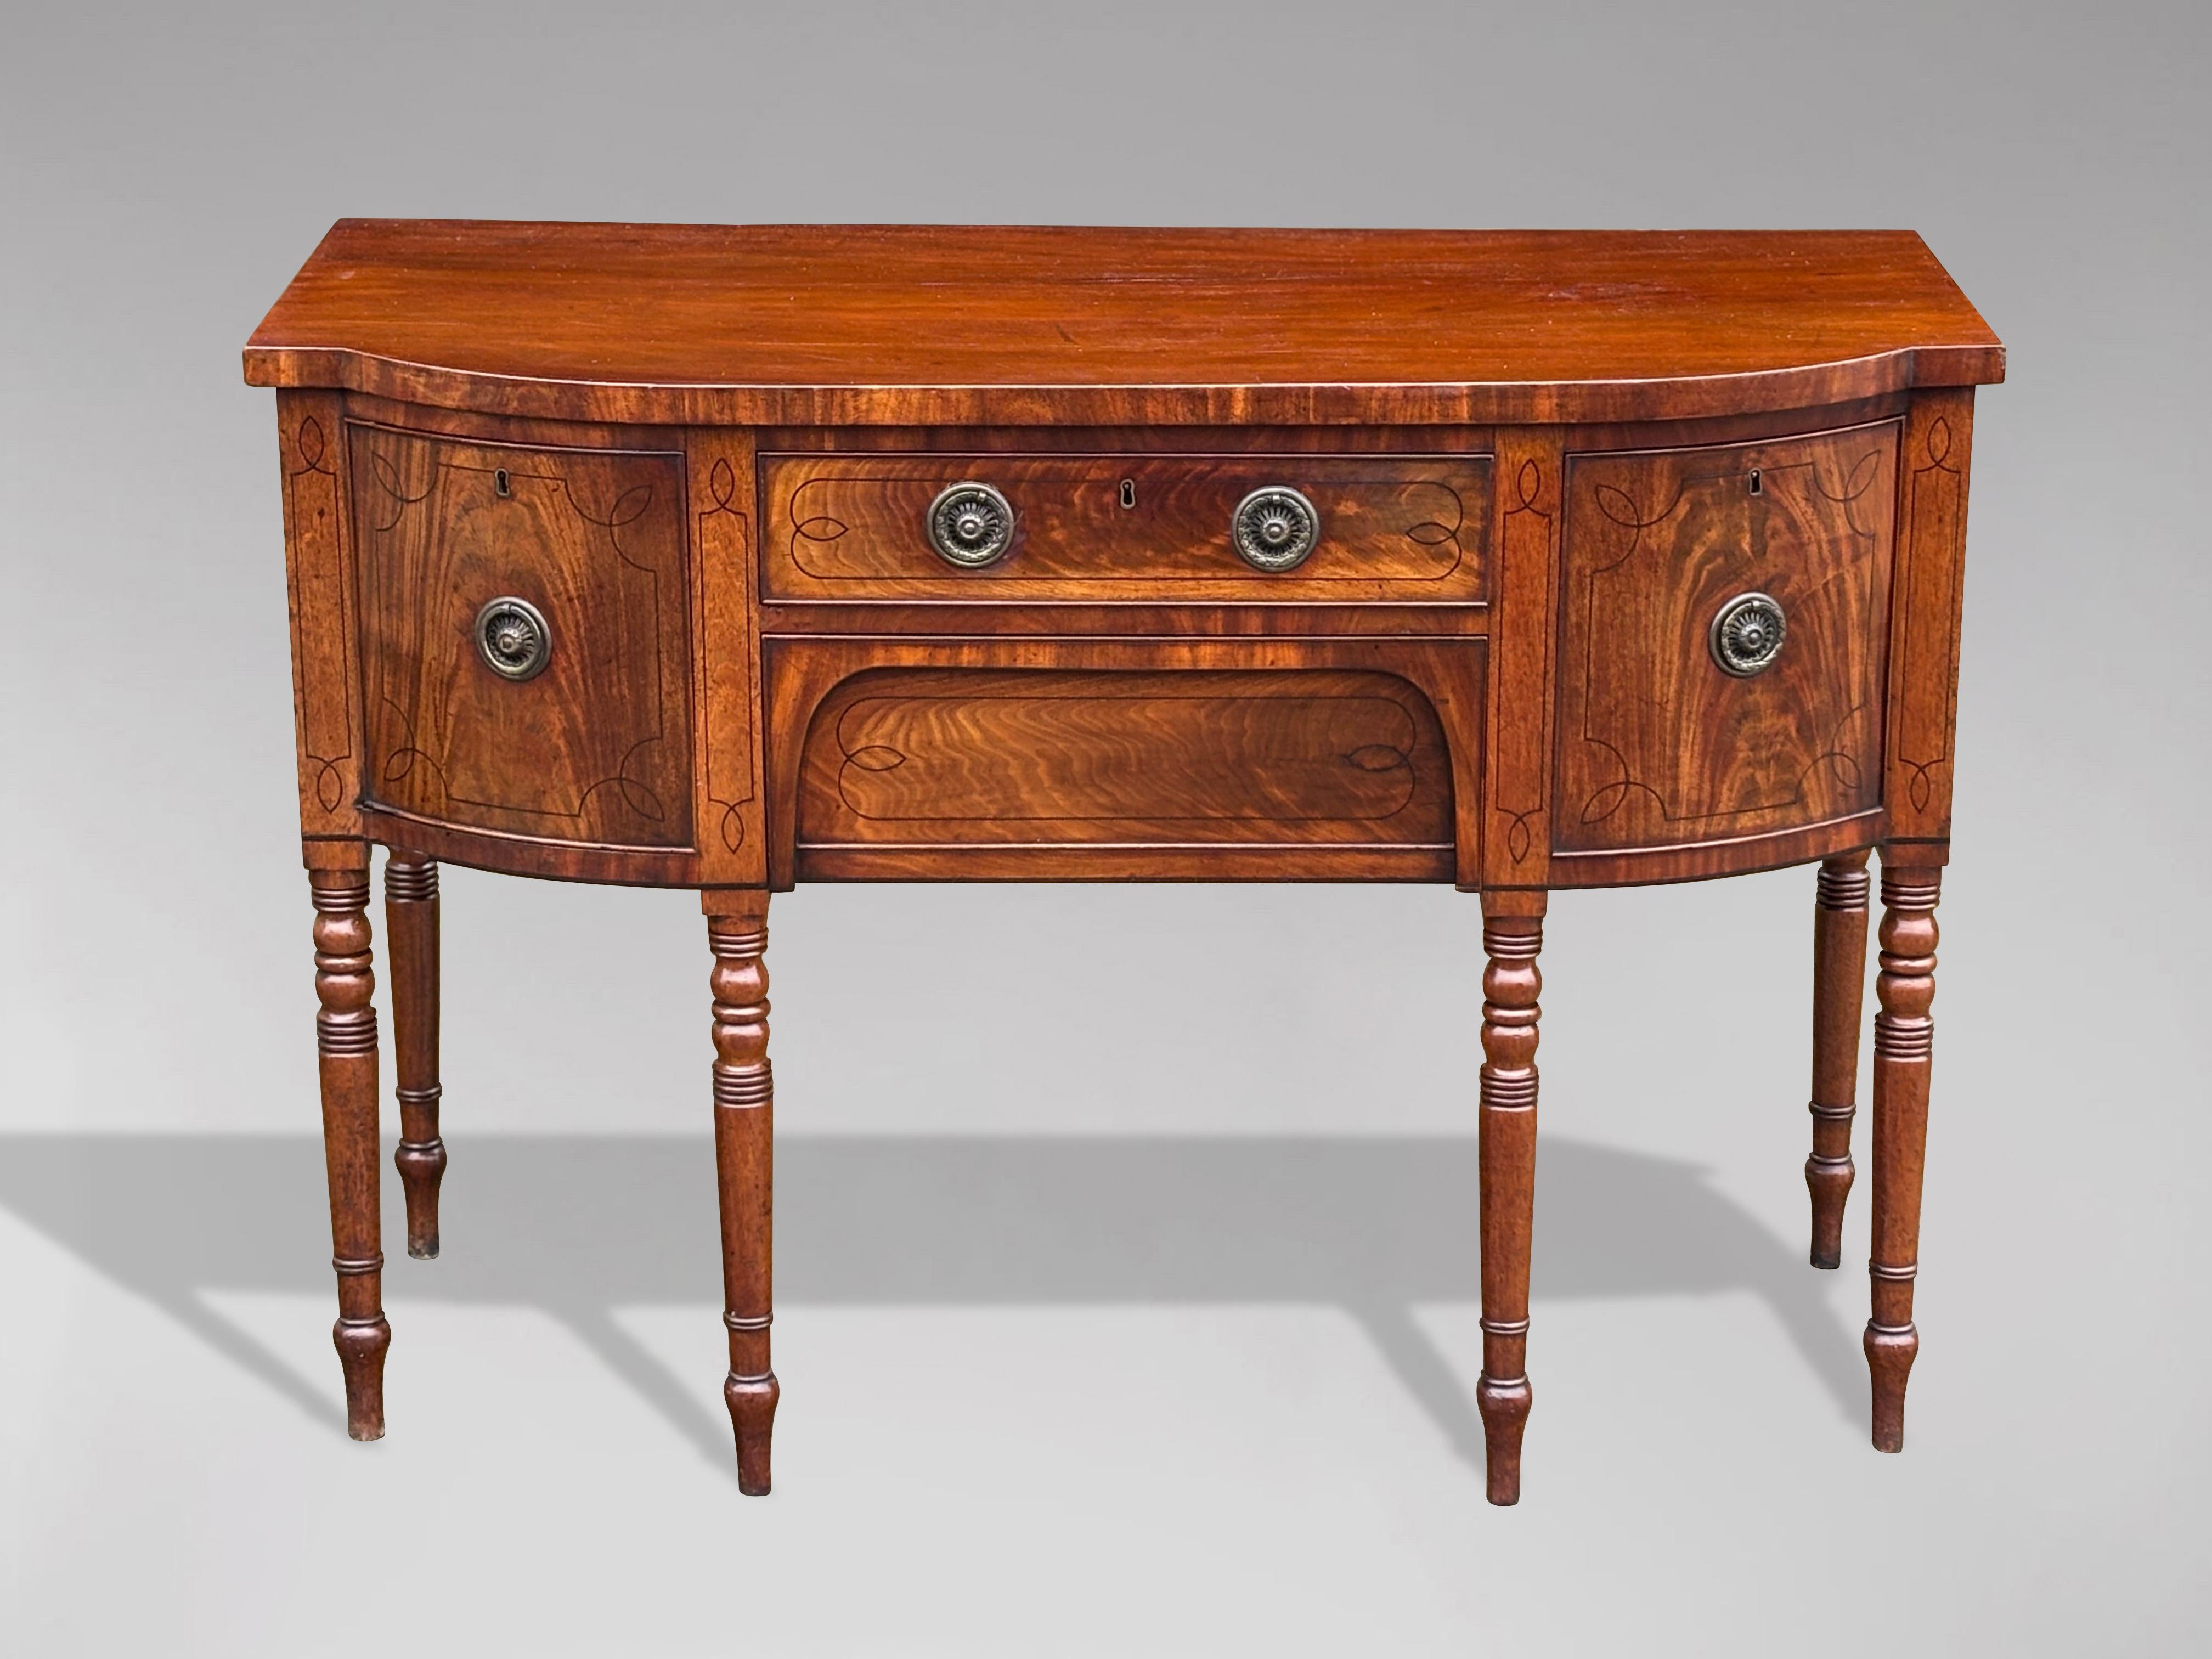 An early 19th century, very fine George III period solid mahogany and ebony inlaid bow front sideboard. This Georgian period breakfront sideboard features a central frieze drawer, with an apron drawer below, flanked by a further deep drawer and